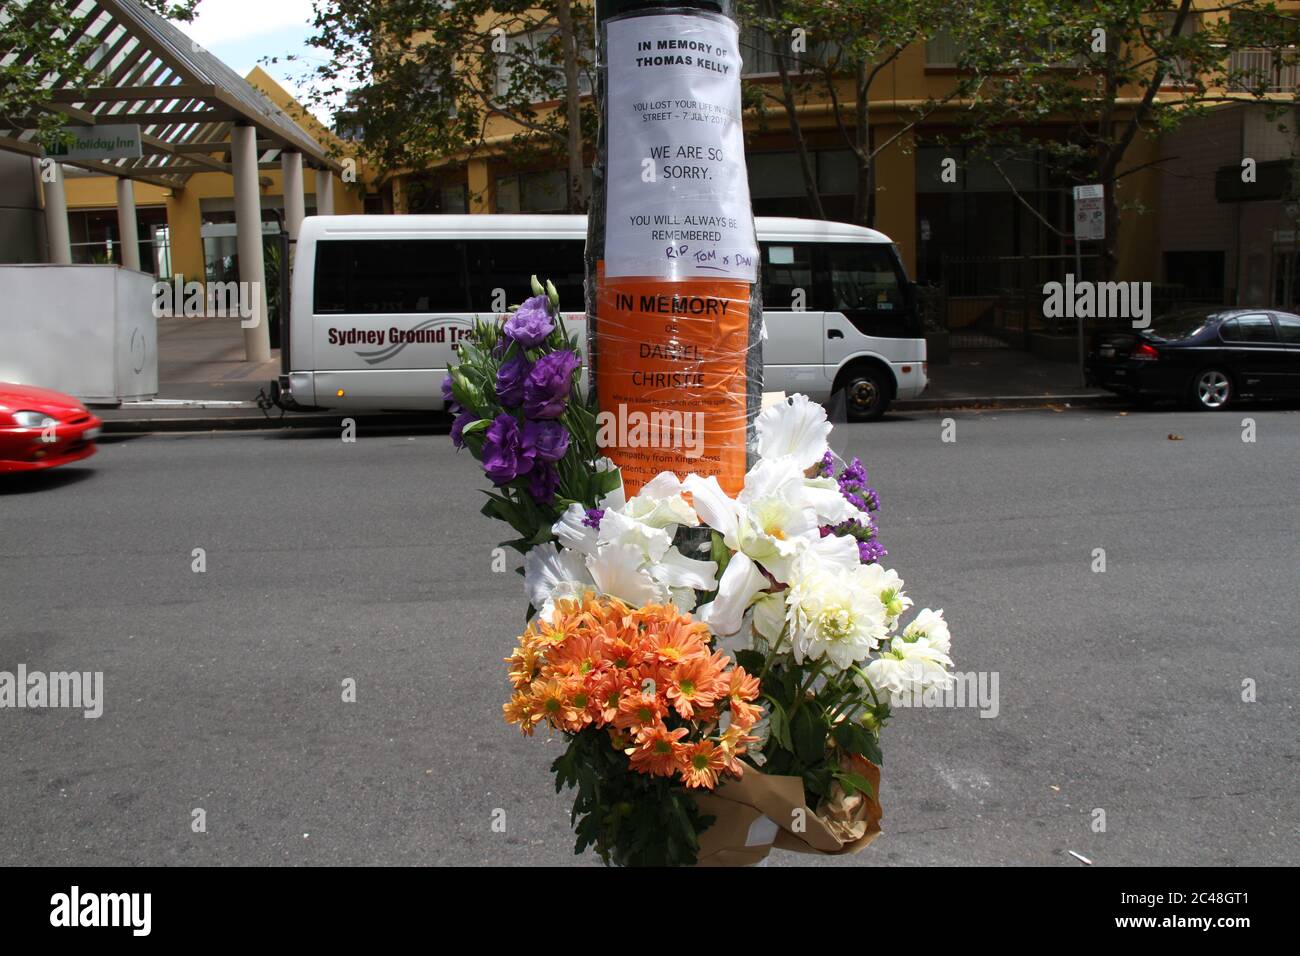 Flowers tied to a lamppost on Victoria Street, Kings Cross in memory of ...